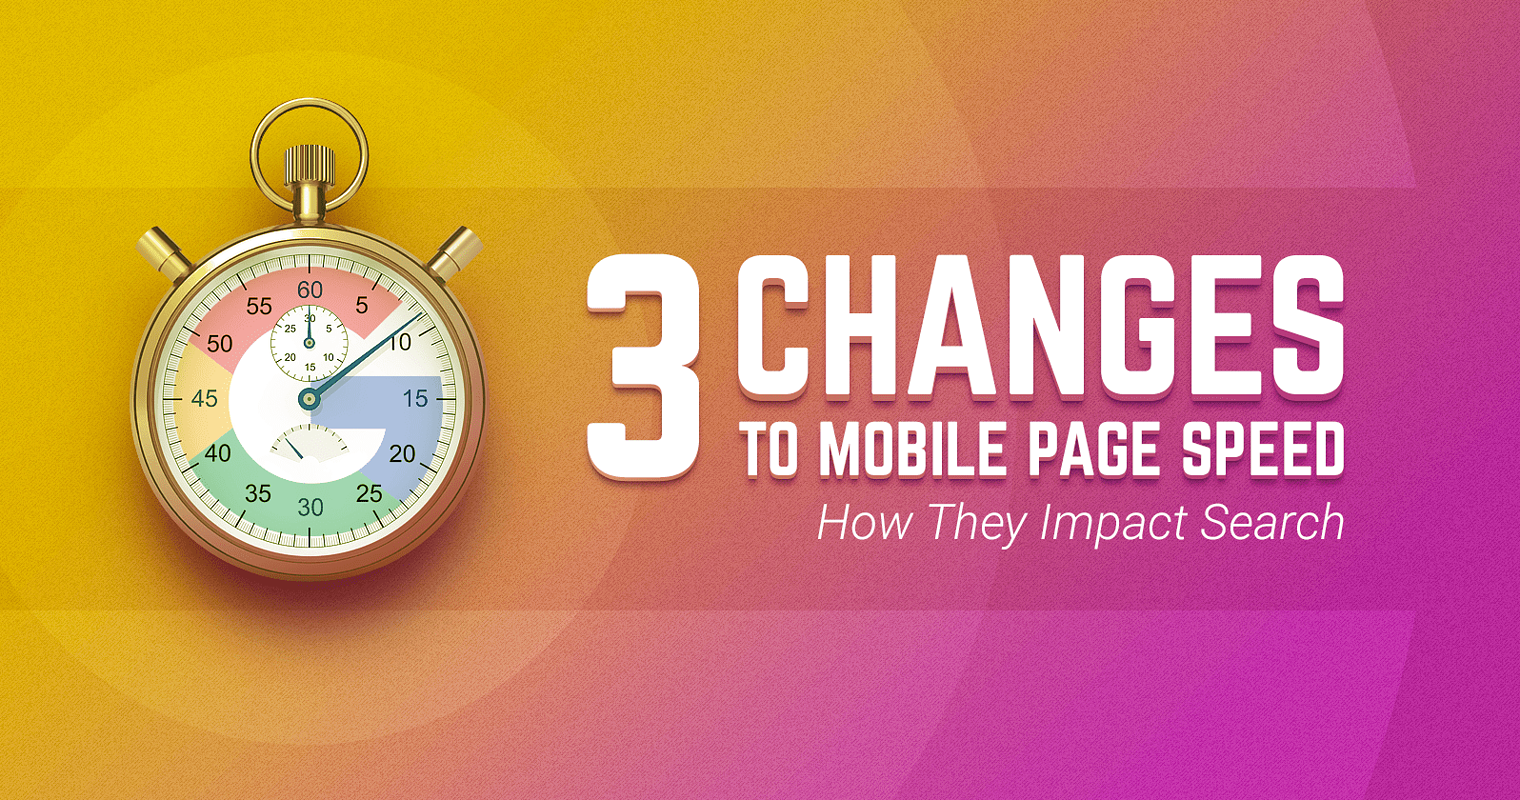 3 Changes to Mobile Page Speed & How It Impacts Search